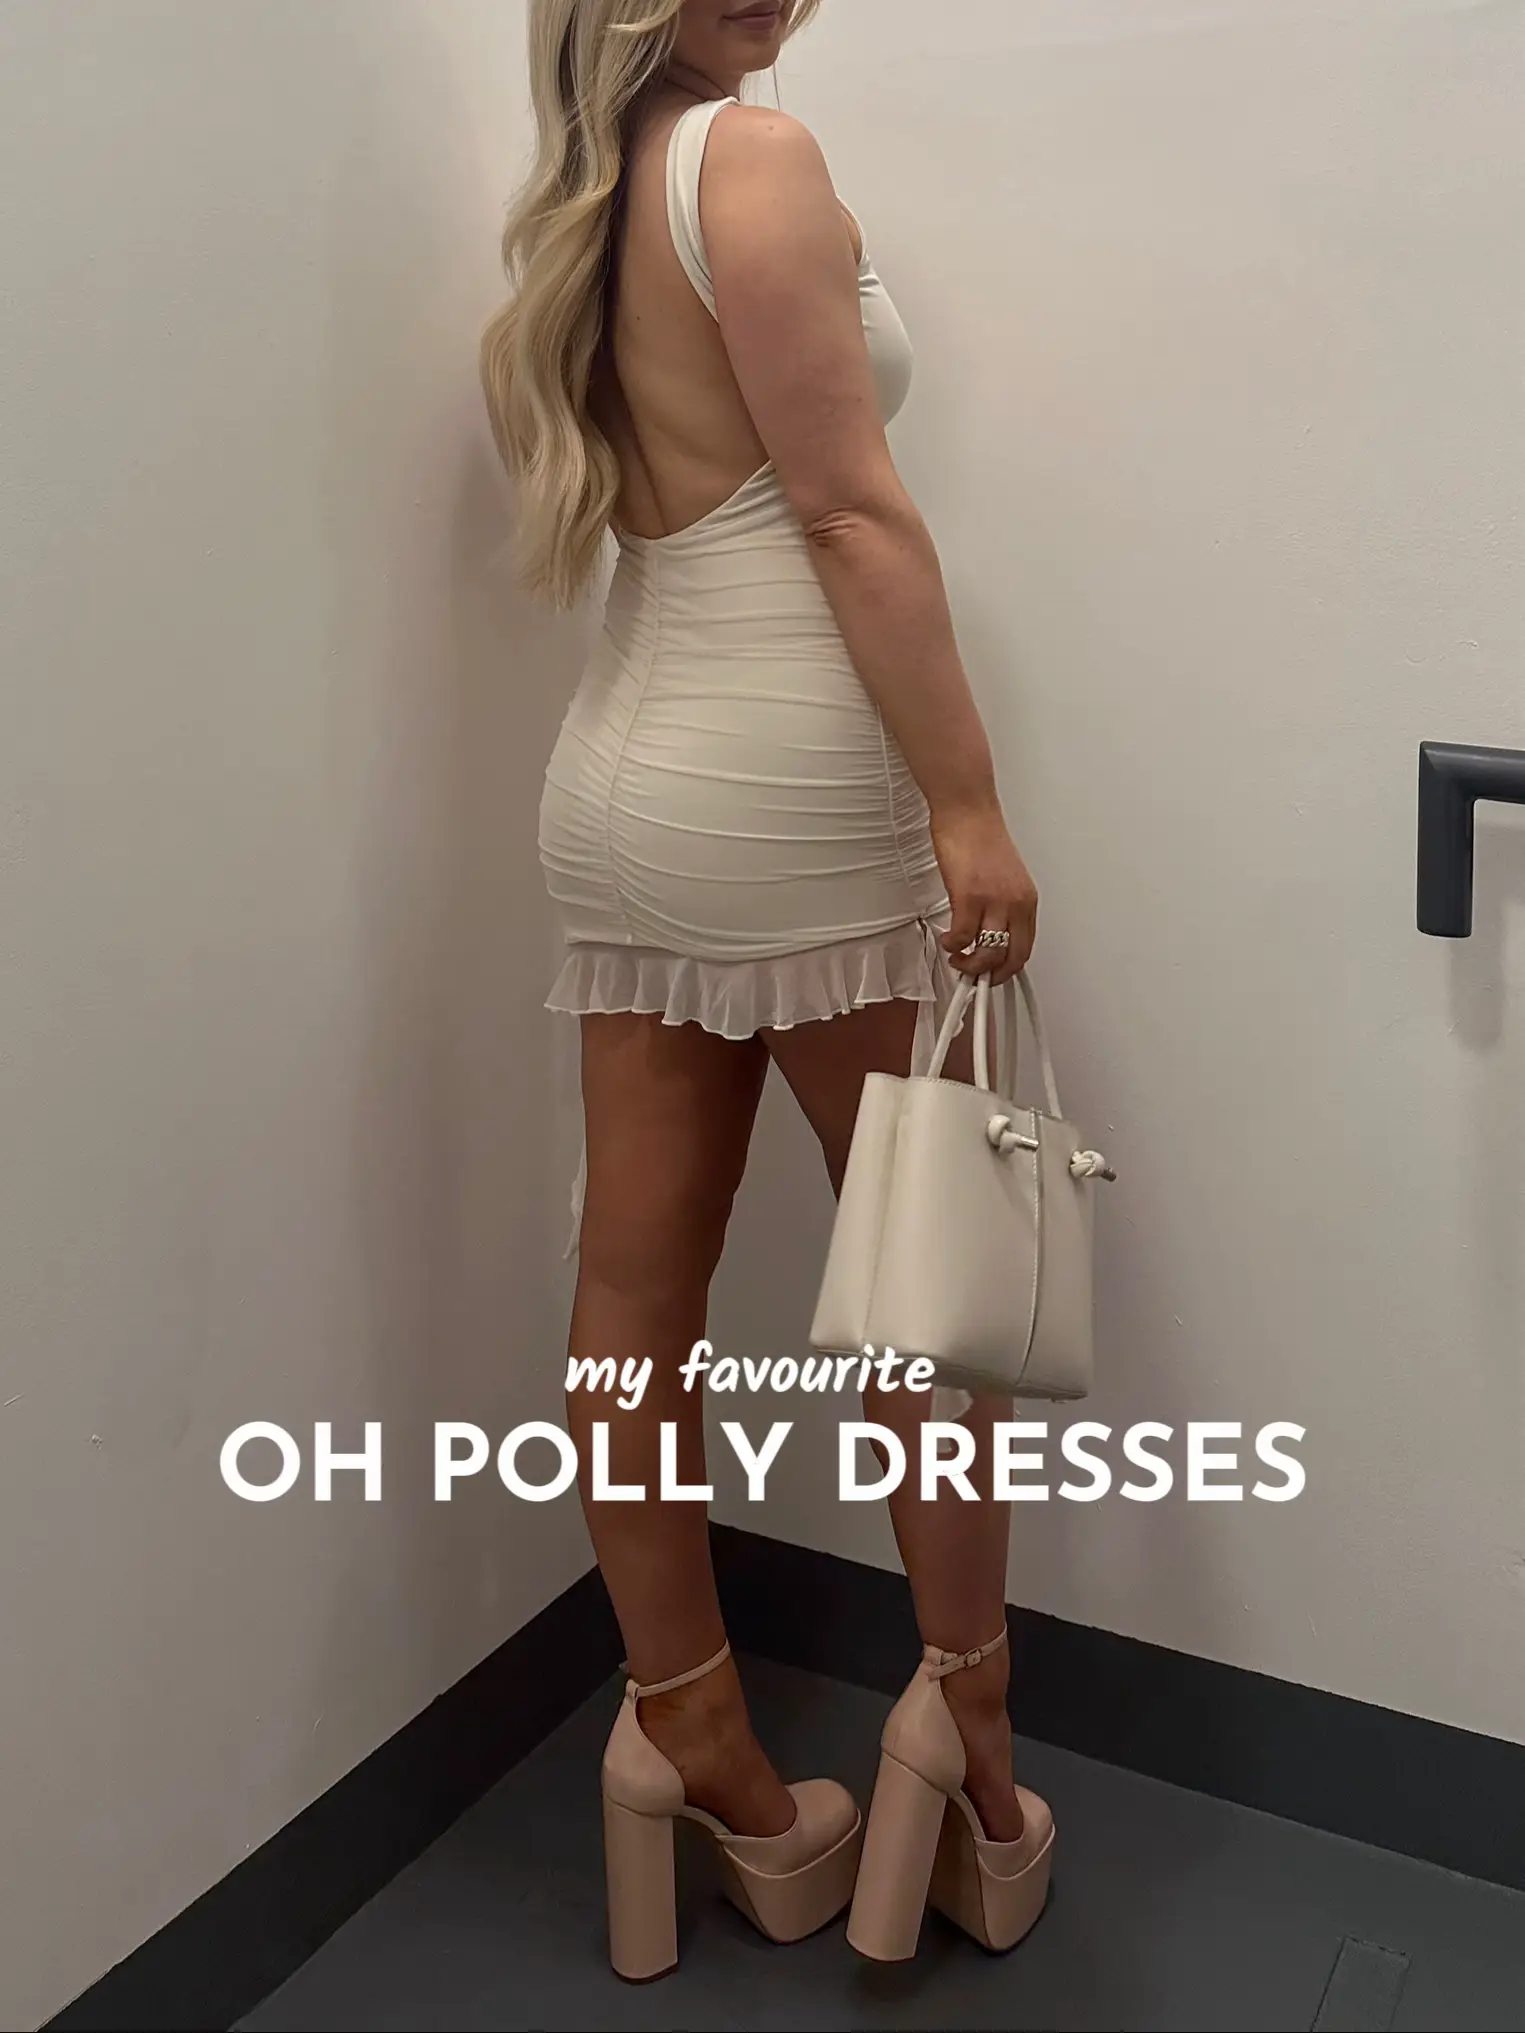 size 10 vs size 16 try on the same dresses from OHPOLLY ..*fail* 